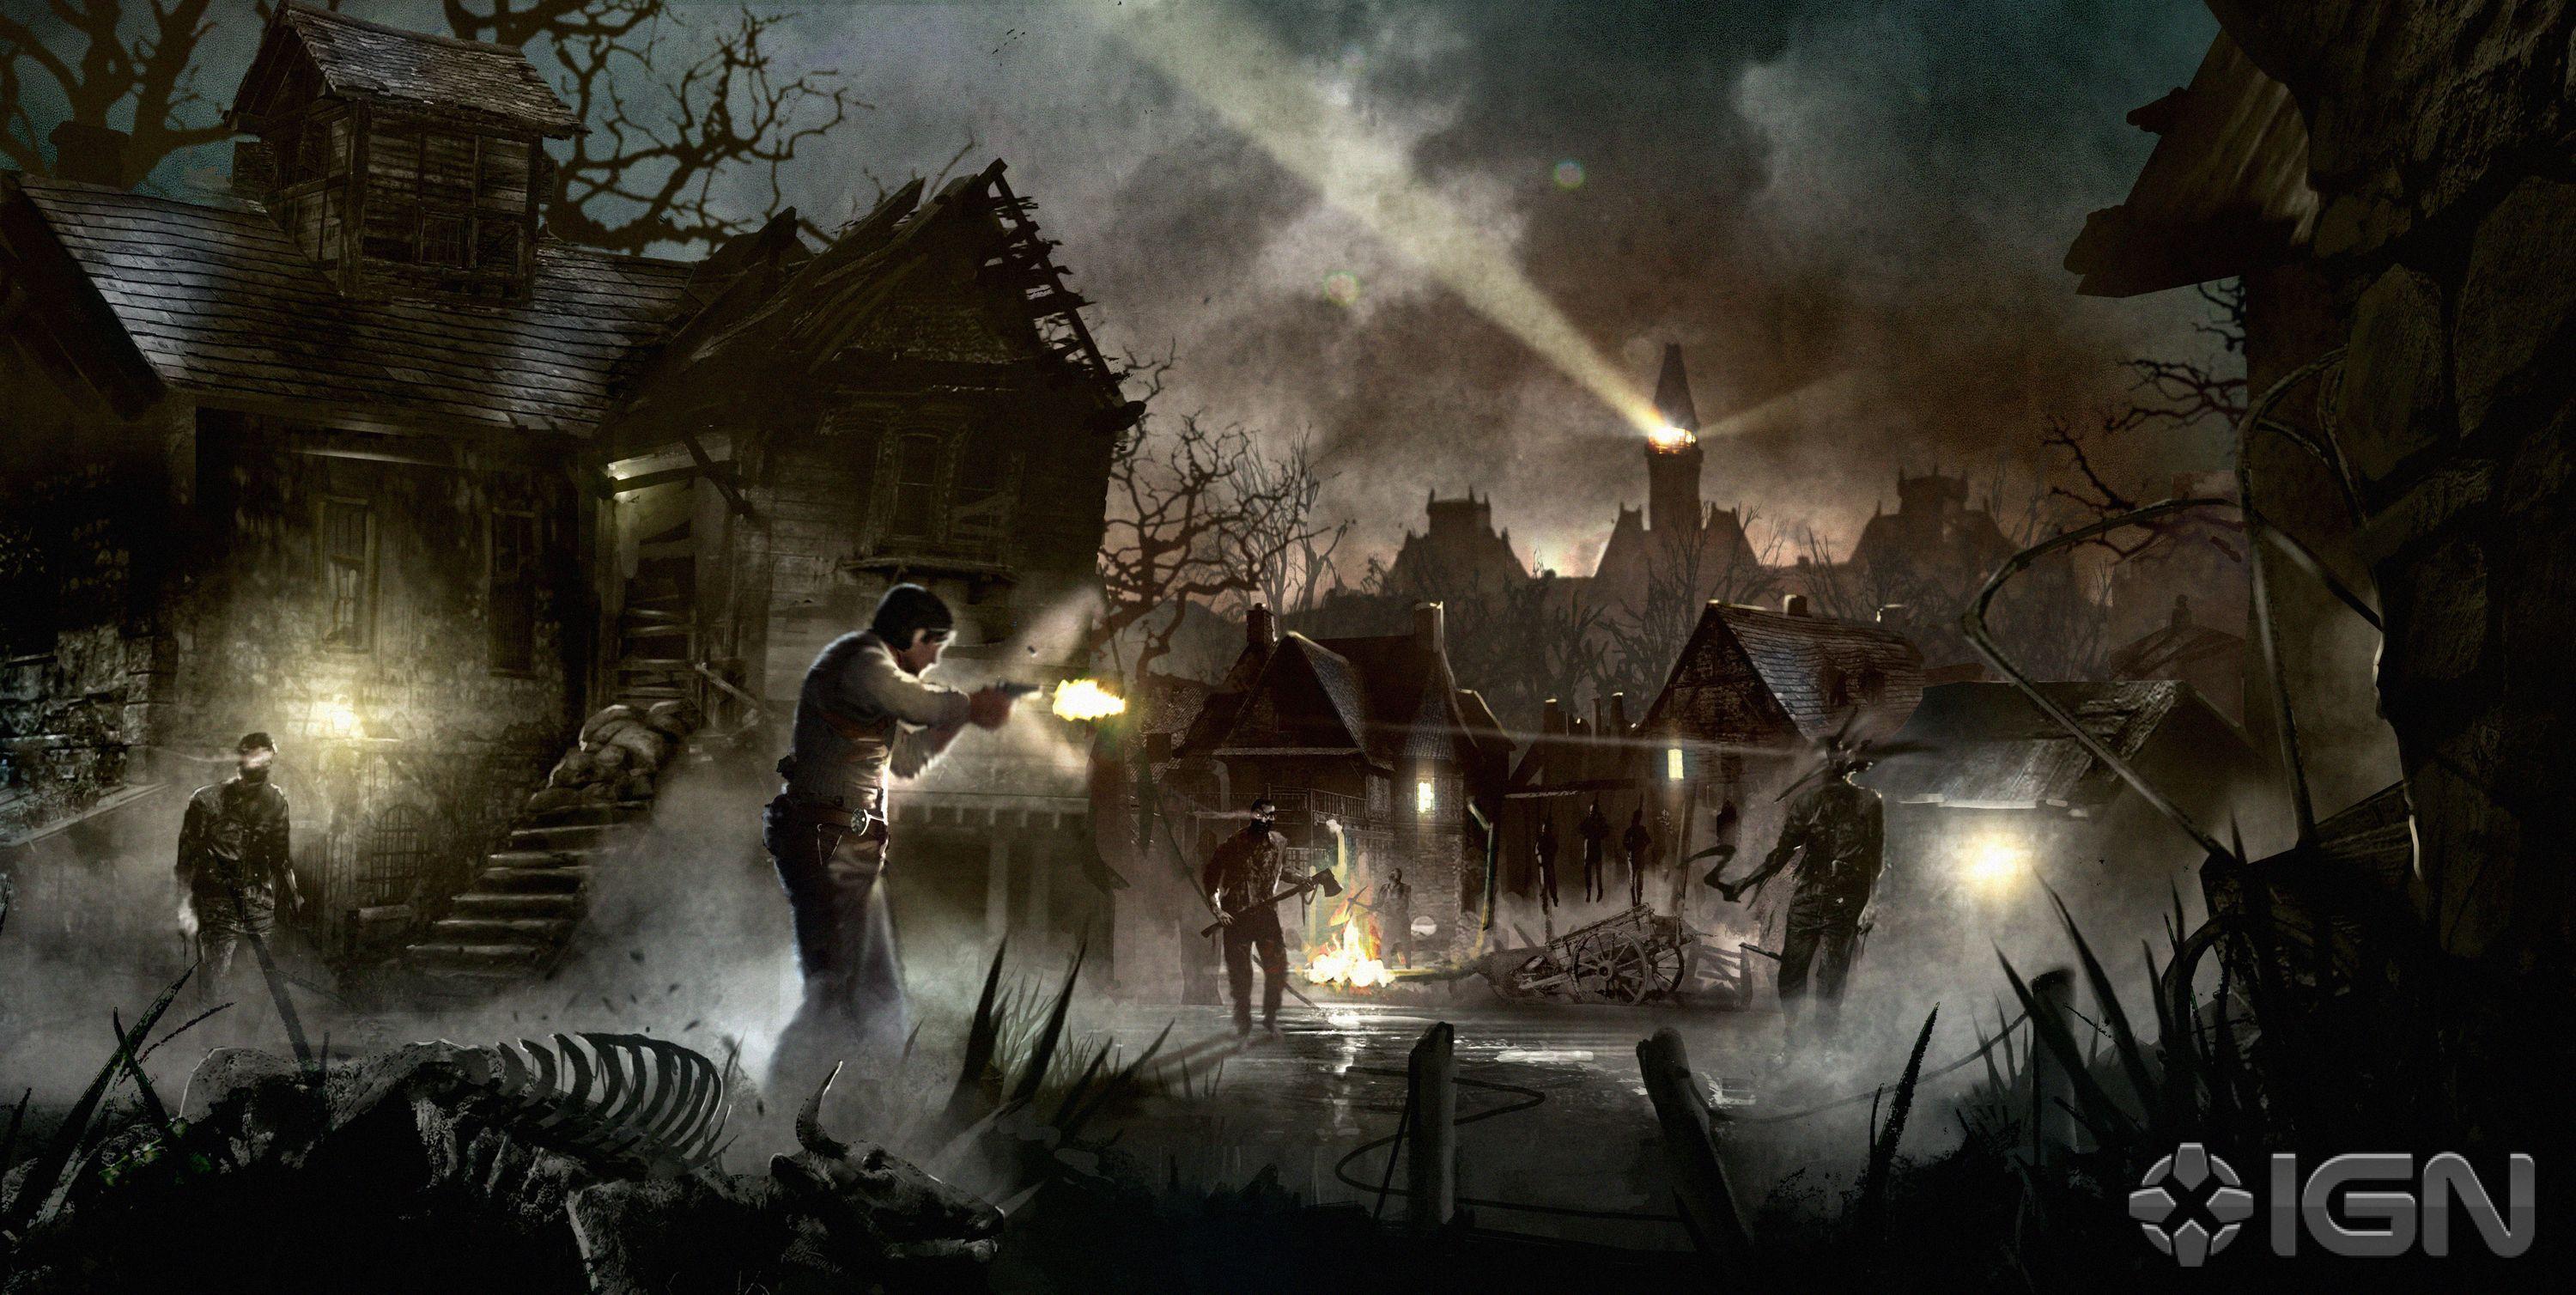 The battle in the game The evil within wallpaper and image